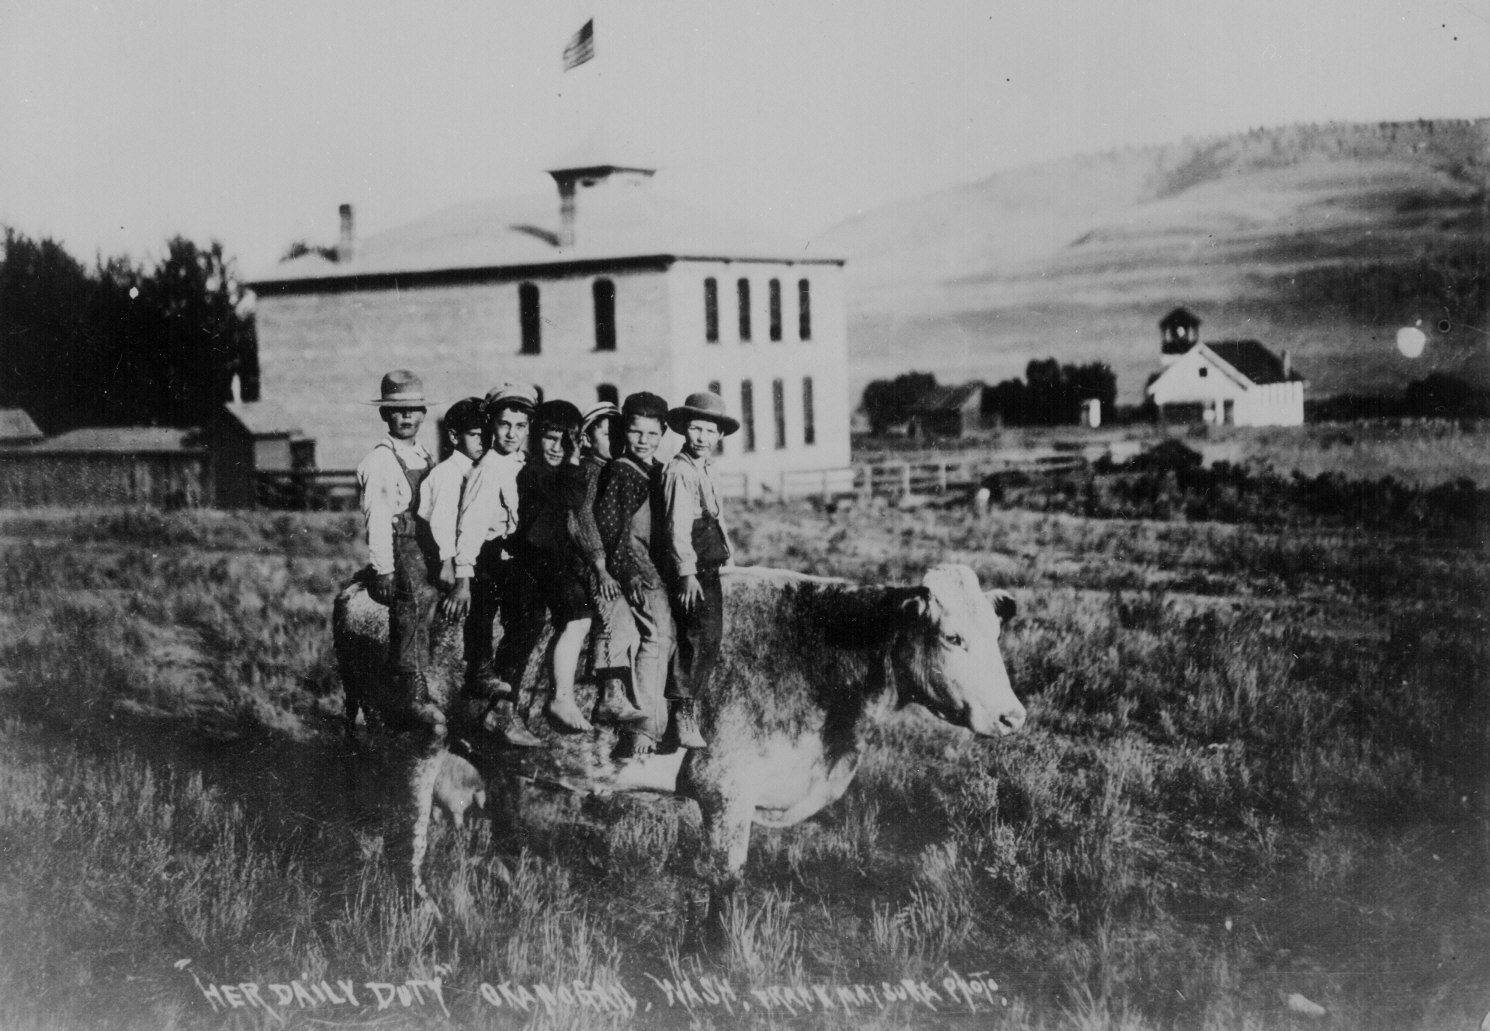 Living in the Old West Photographs from the birth of the United States image 188